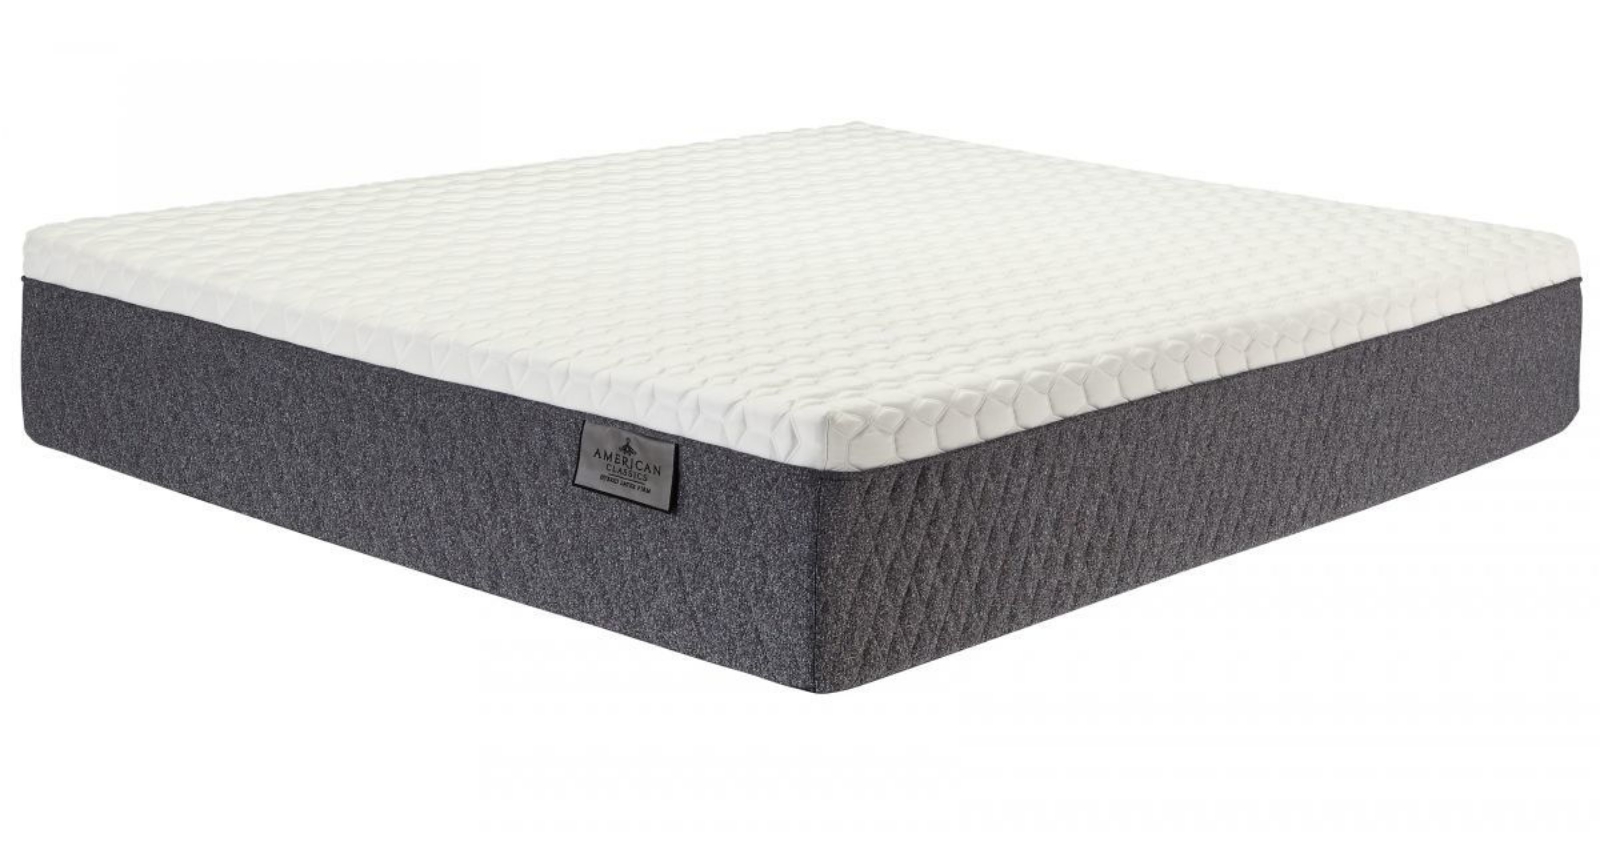 Picture of American Classic Firm Latex Mattress